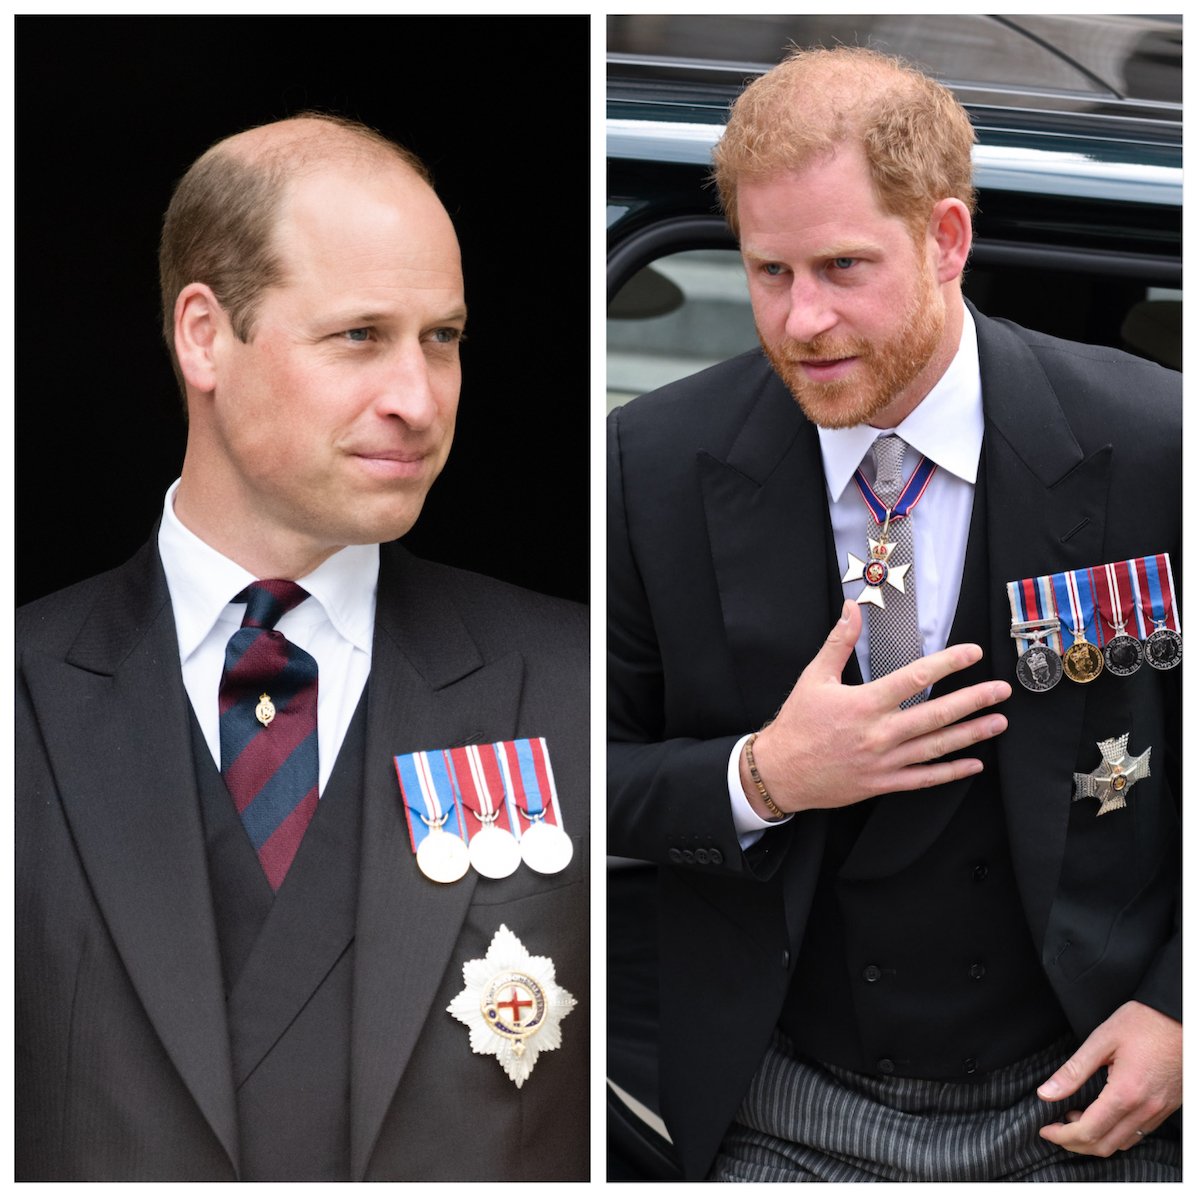 Prince William at St. Paul's Cathedral for a National Service of Thanksgiving; Prince Harry at St. Paul's Cathedral for a National Service of Thanksgiving